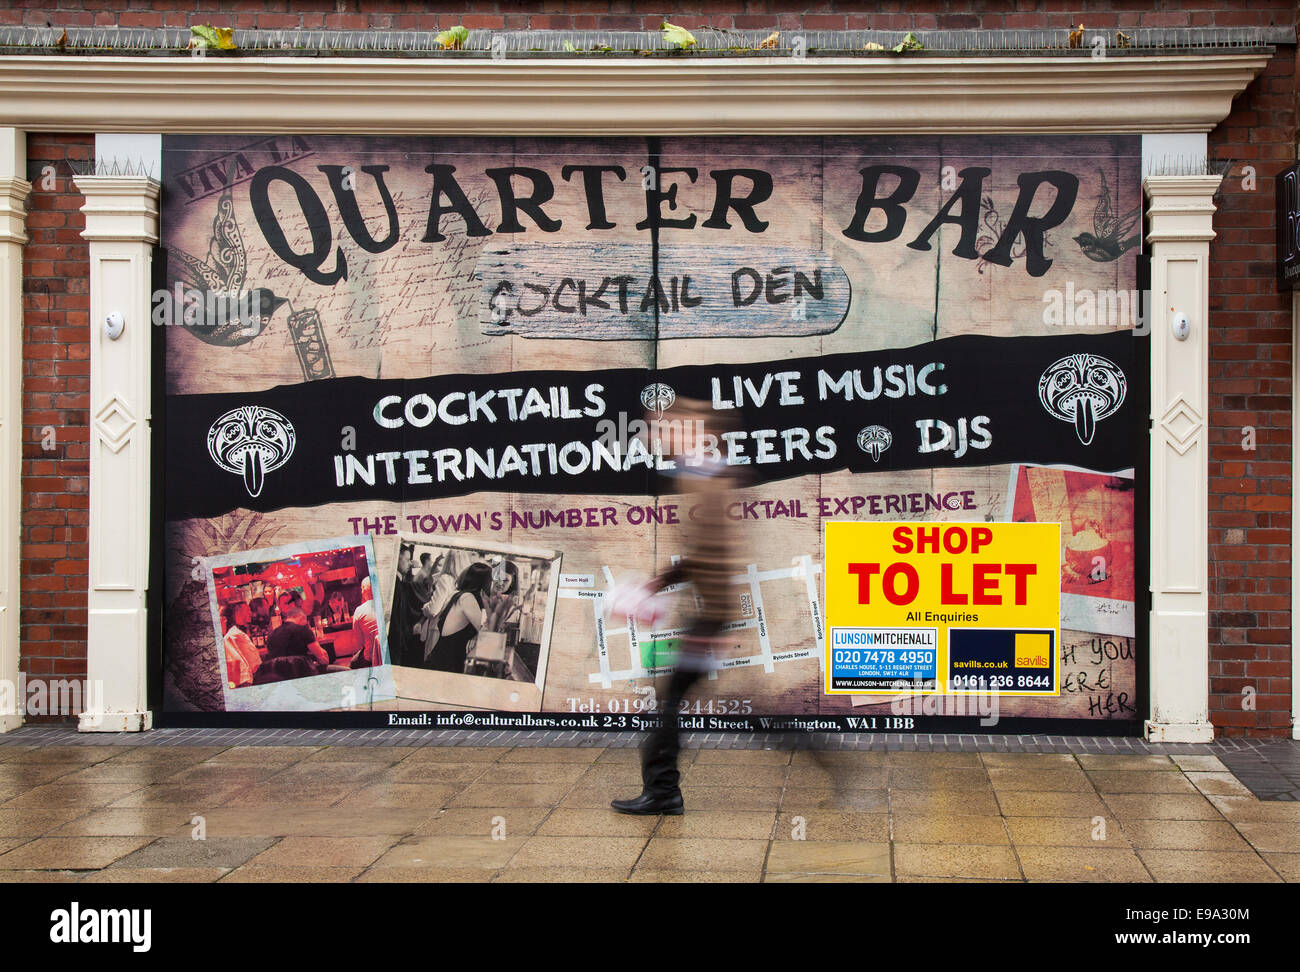 Quarter Bar Cocktail Den to Let in Warrington, Cheshire.  Warrington Borough Council propose to regenerate the Bridge Street Quarter.  The proposed development will transform the Bridge Street area into a vibrant new commercial part of the town centre providing a new market hall, cinema, restaurants, offices and a new public square. The existing shopping centre has seen a significant decline in trade over recent years. Stock Photo